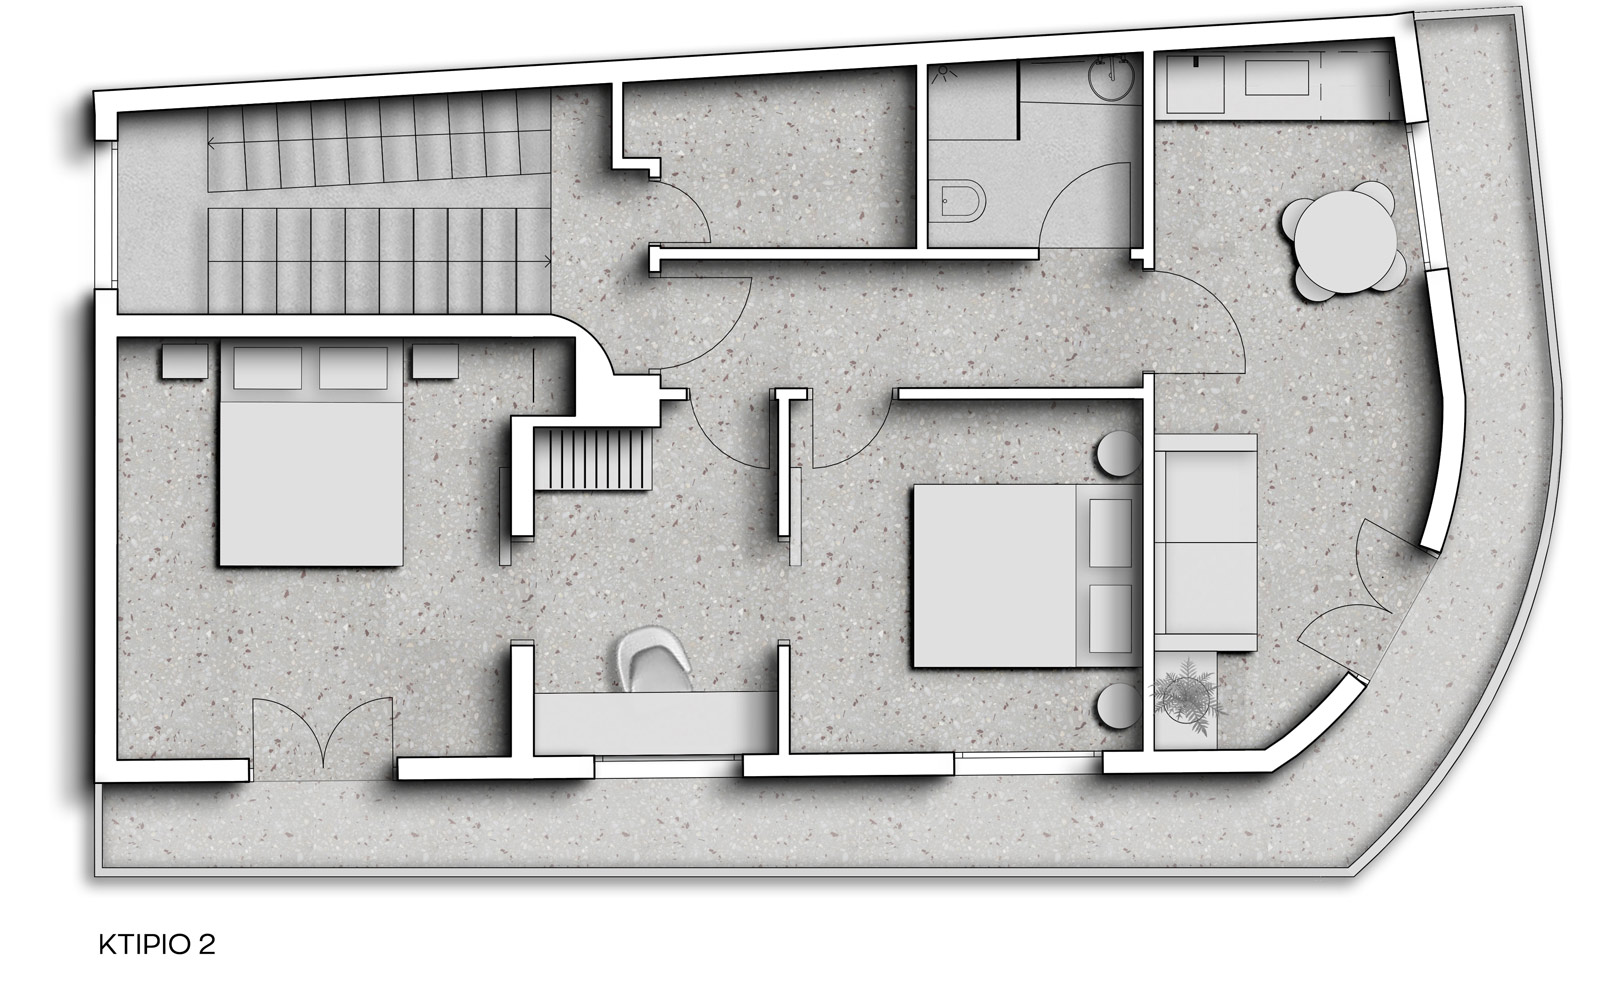 Building layout